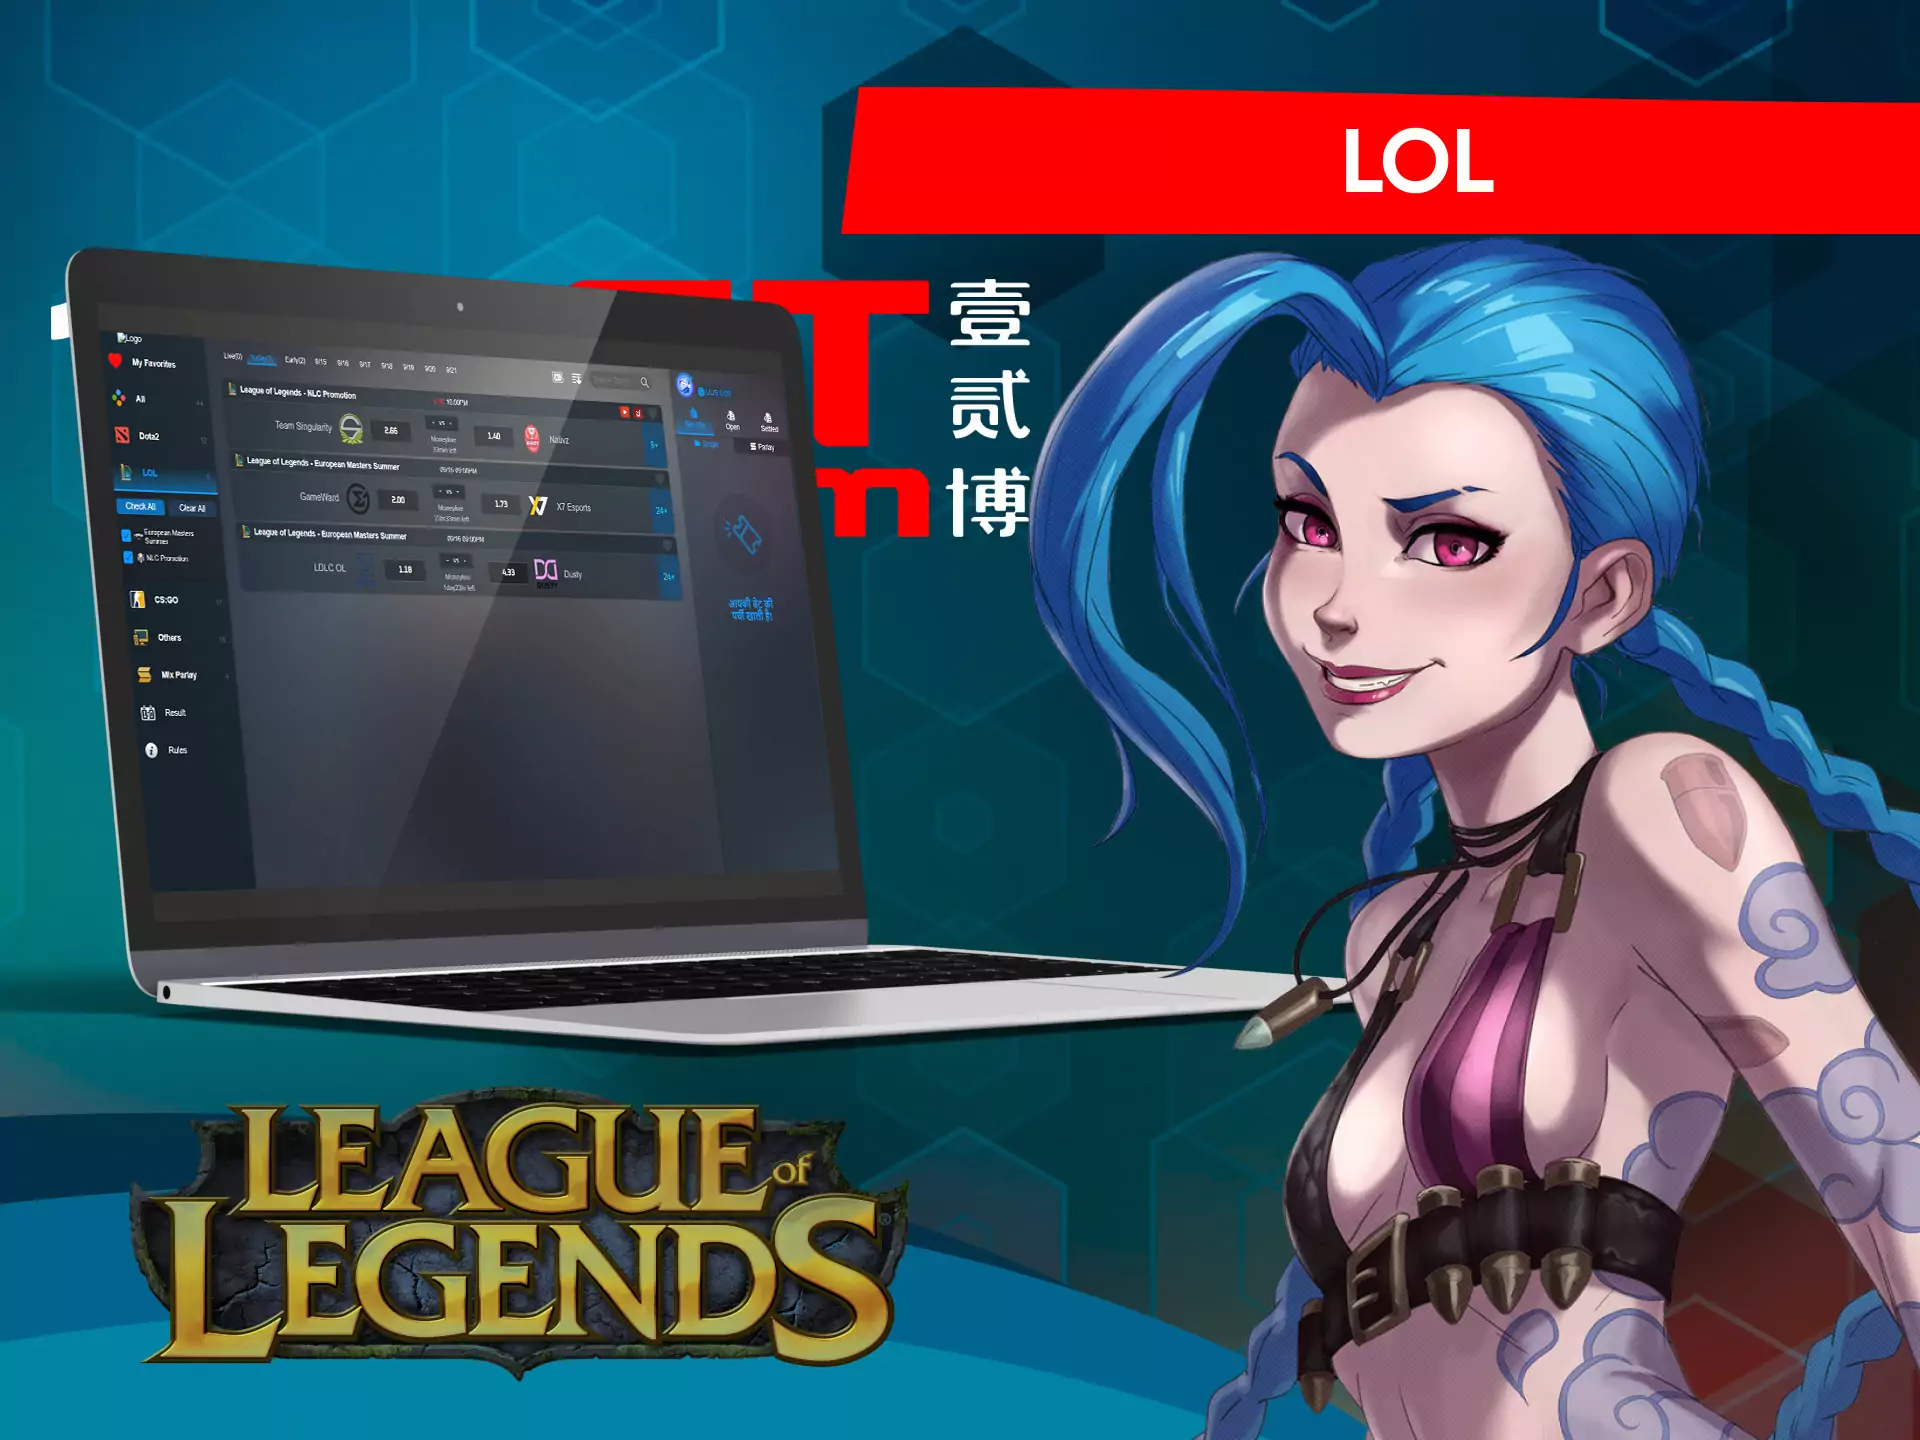 On 12bet, you can bet online on League of Legends matches.